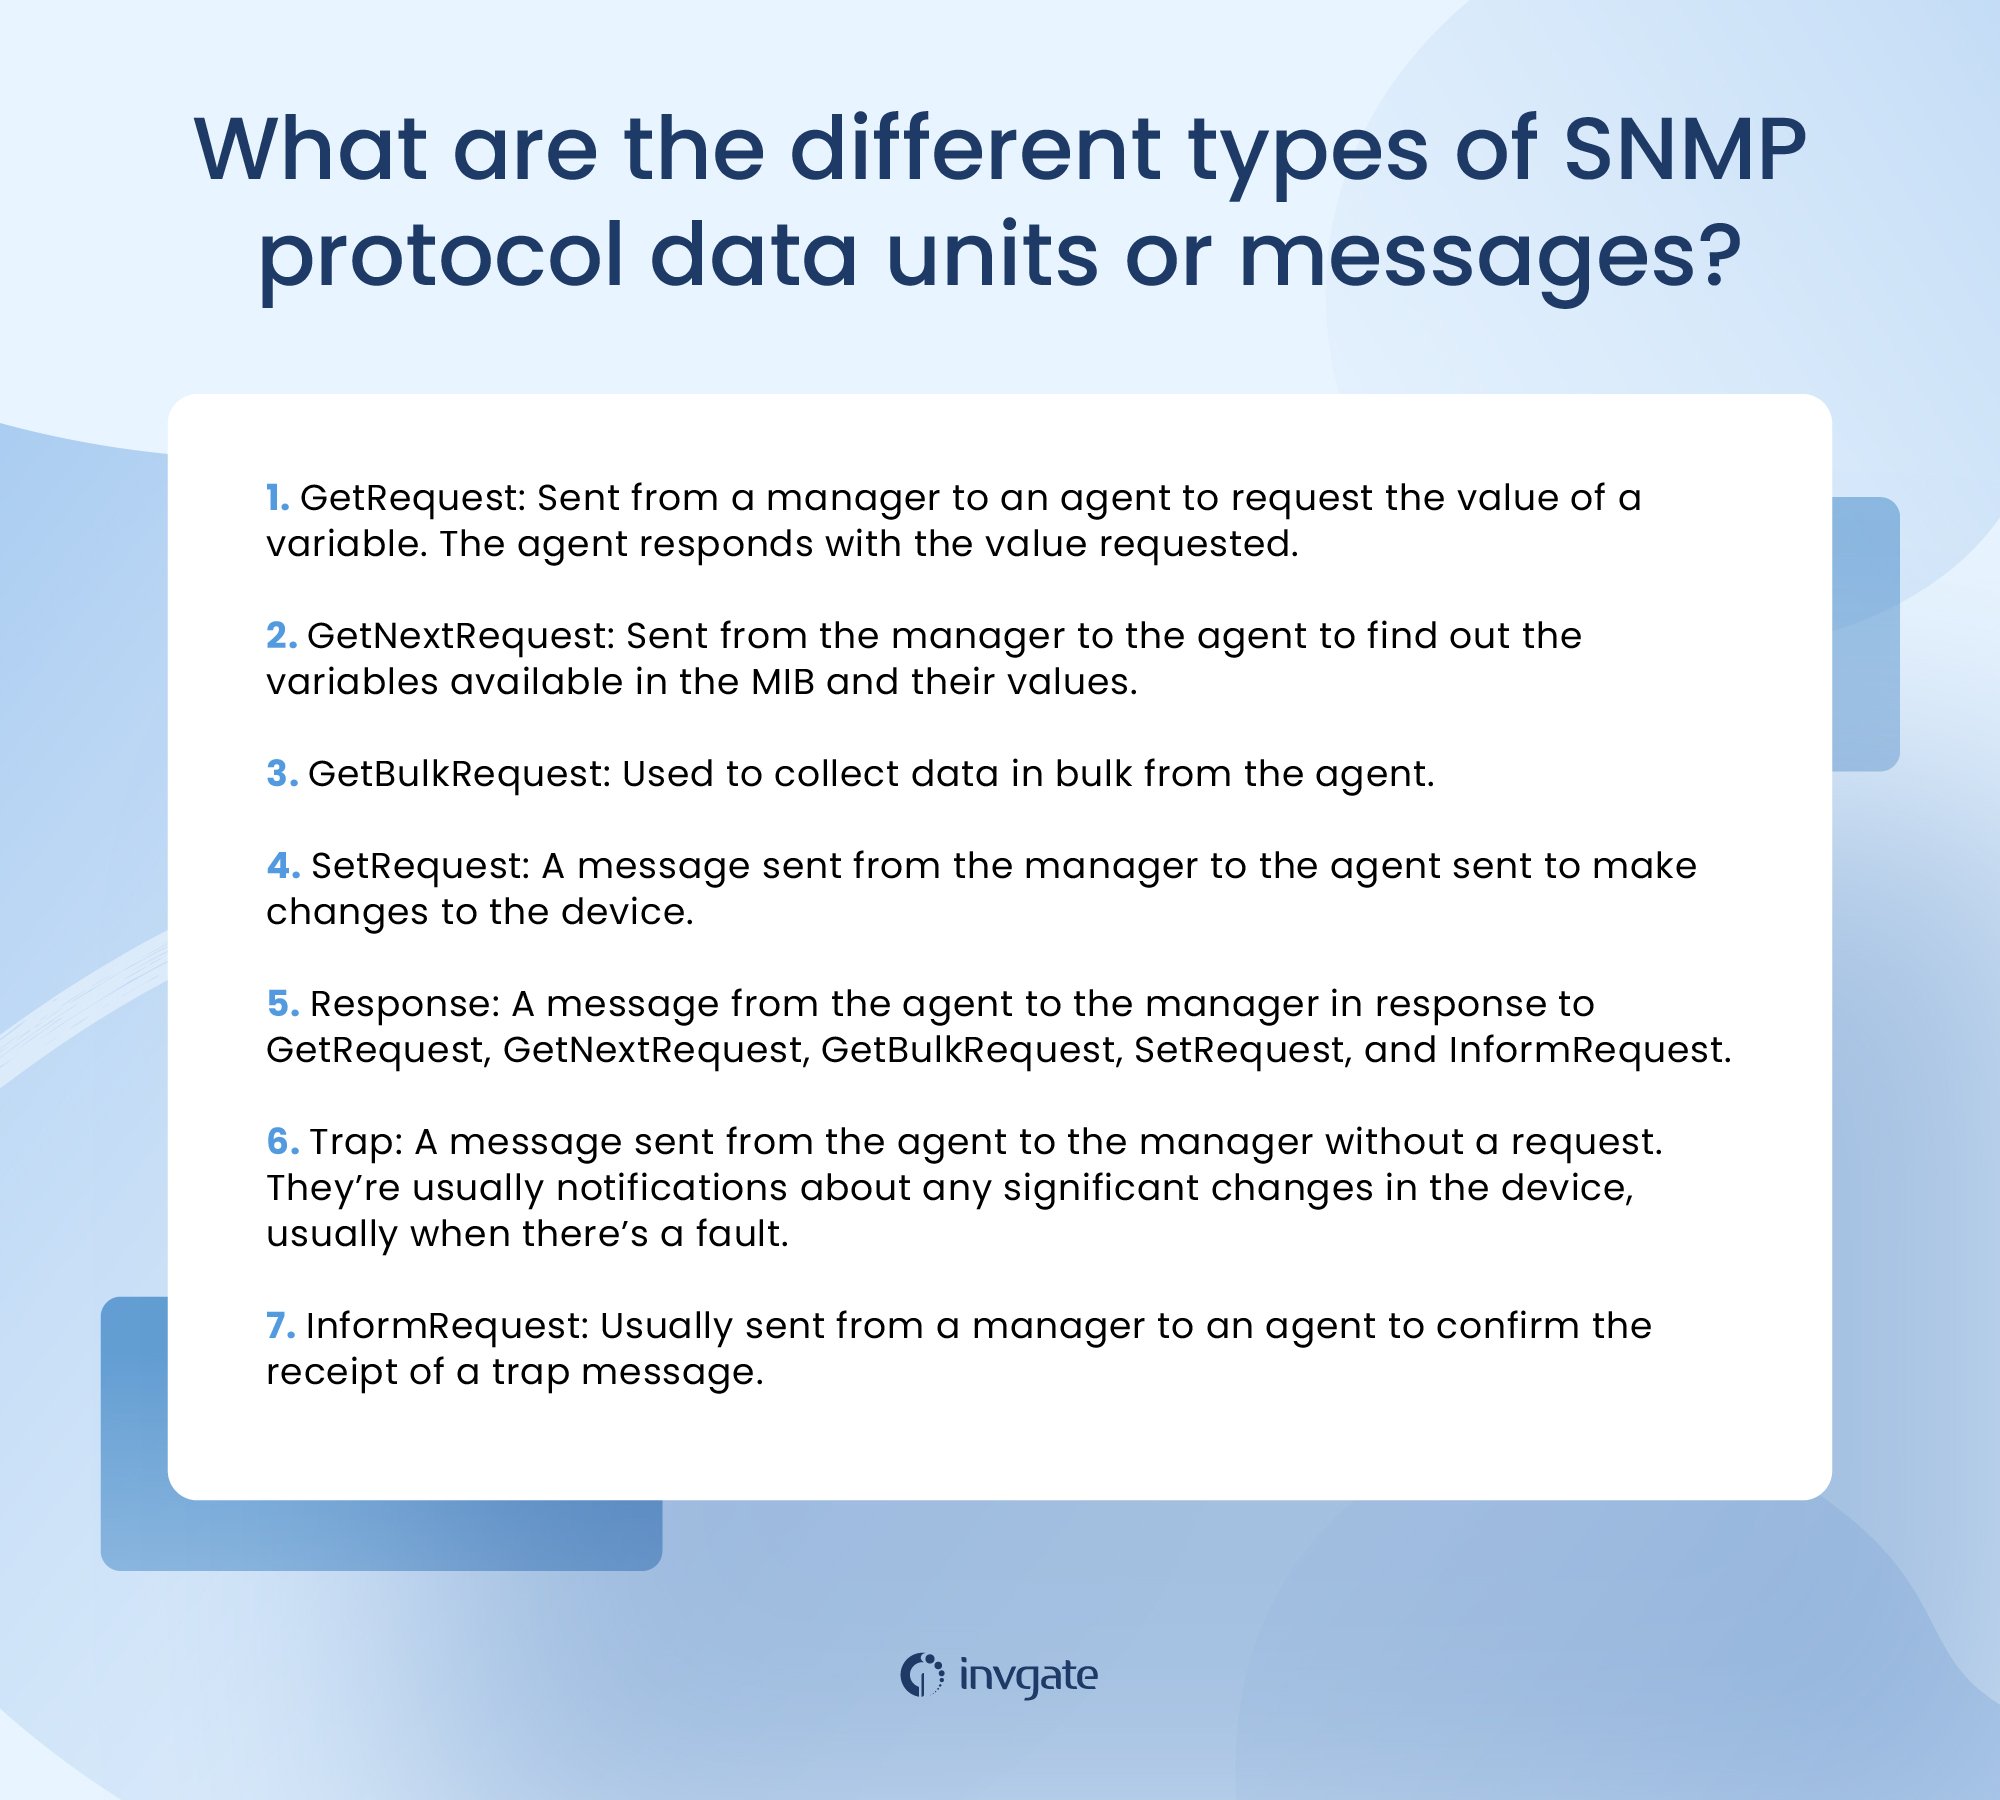 The different types of SNMP data units